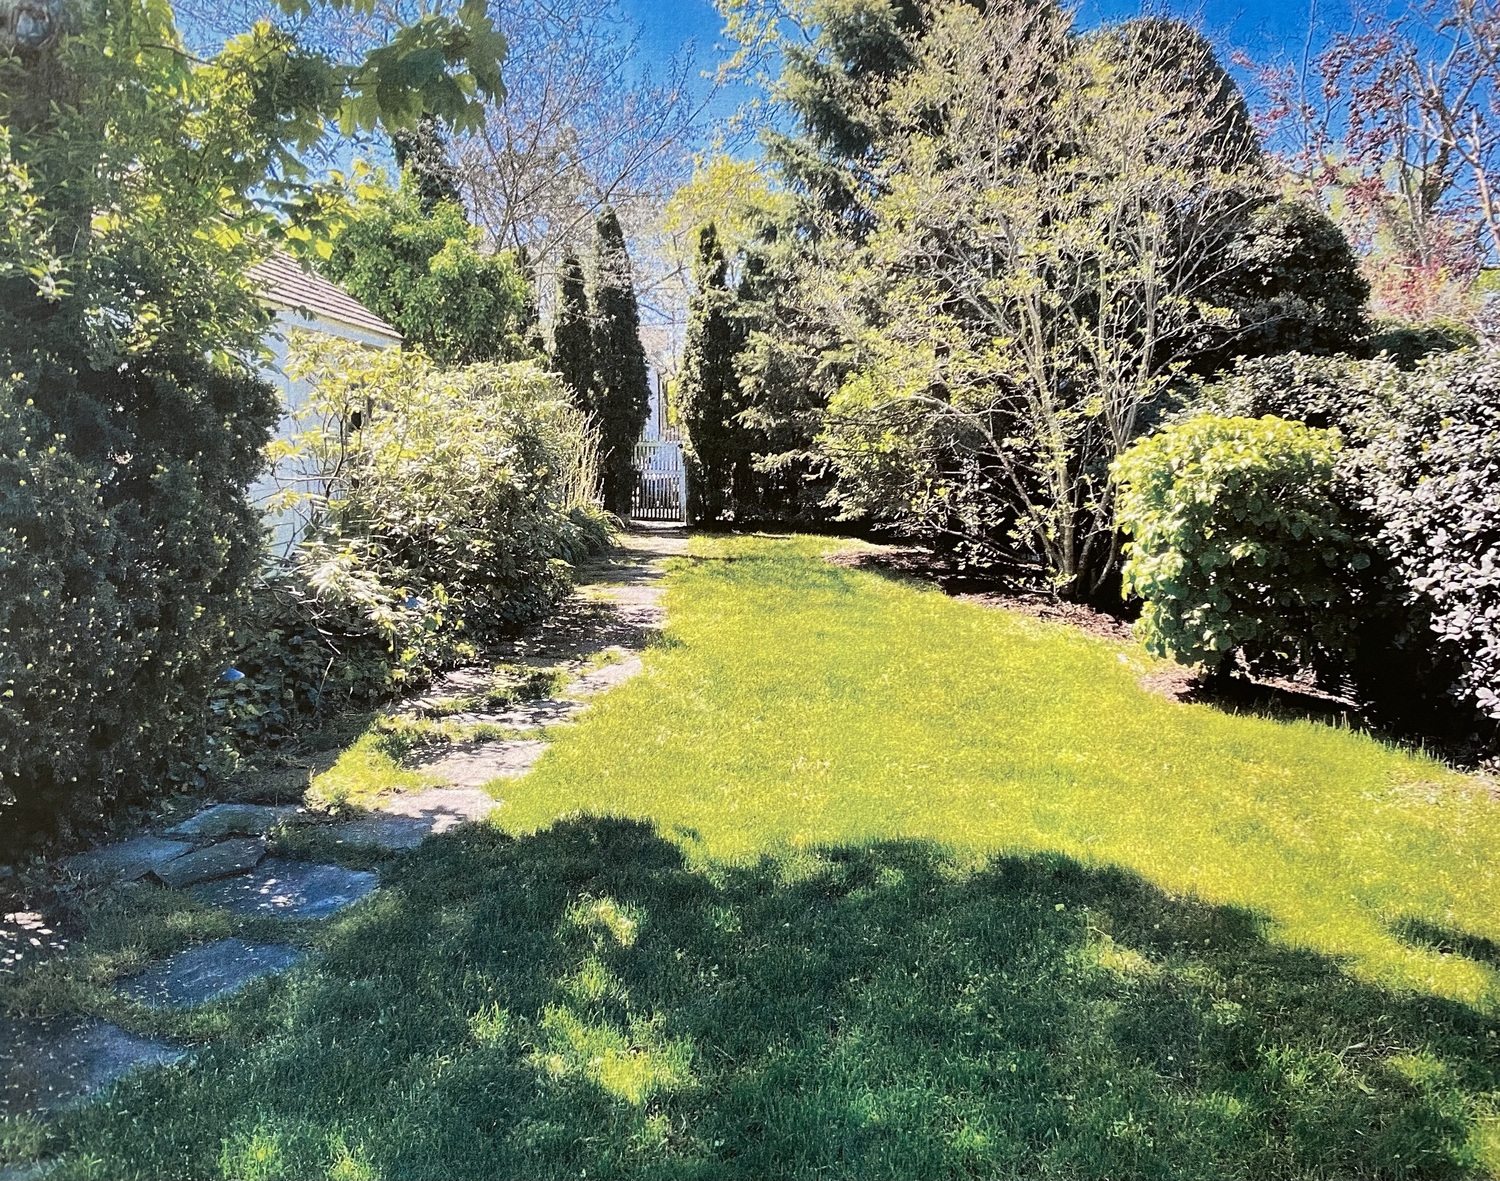 The backyard at 68 Madison Street, where a pool is planned for which a zoning variance was granted in 2021 allowing it to be five feet from the property line with 20 Union Street (at right). The gate leads to a short driveway off Jefferson Street.